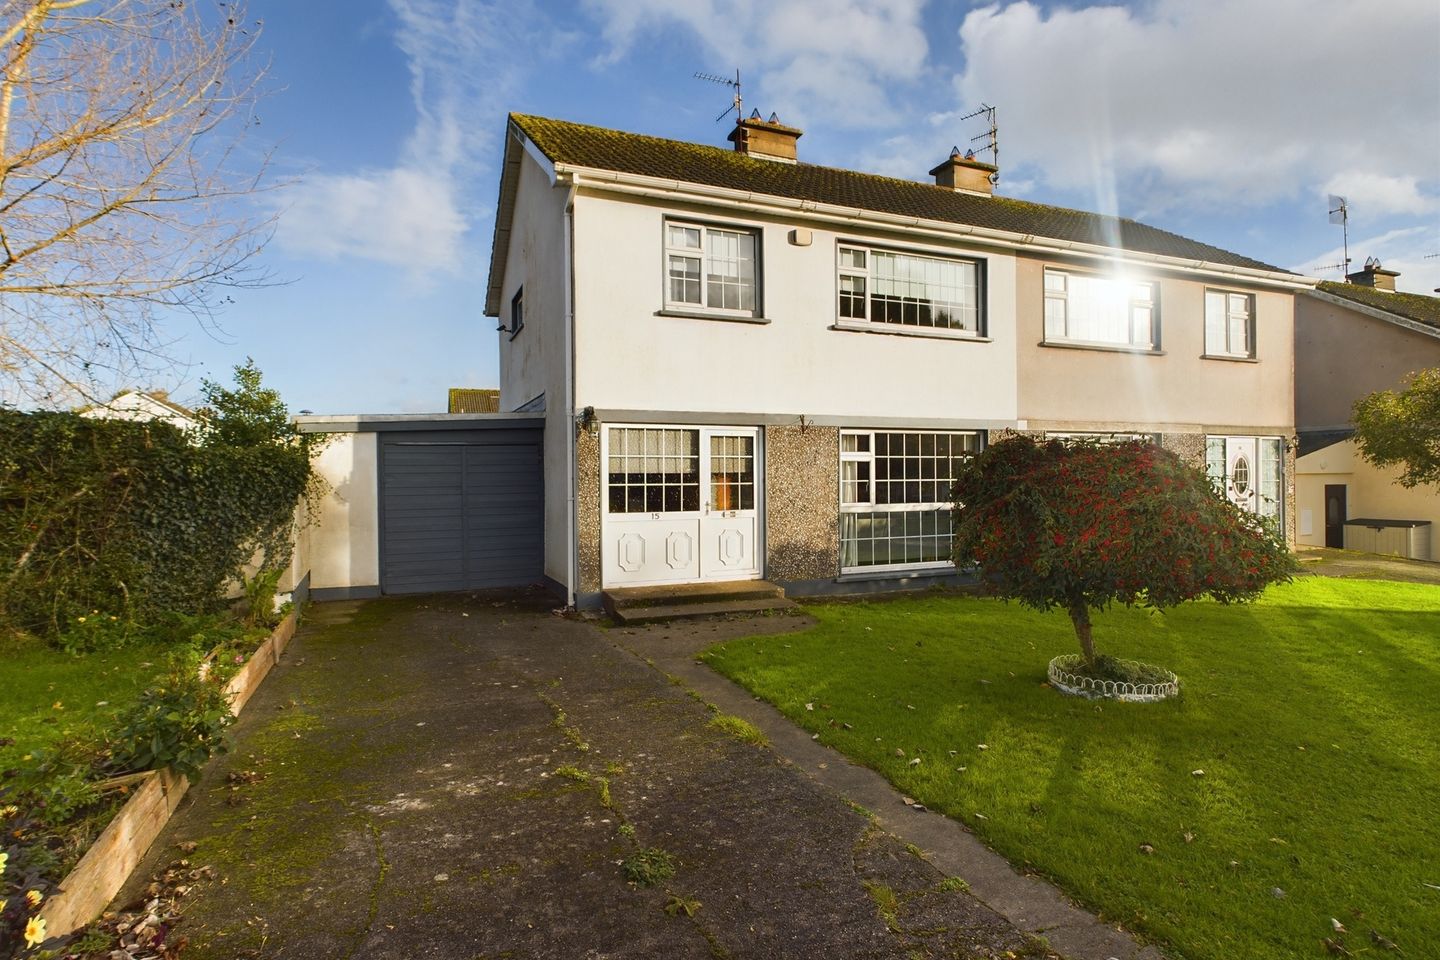 15 Lissadell Park, Carrick-on-Suir, Co. Tipperary, E32EH63